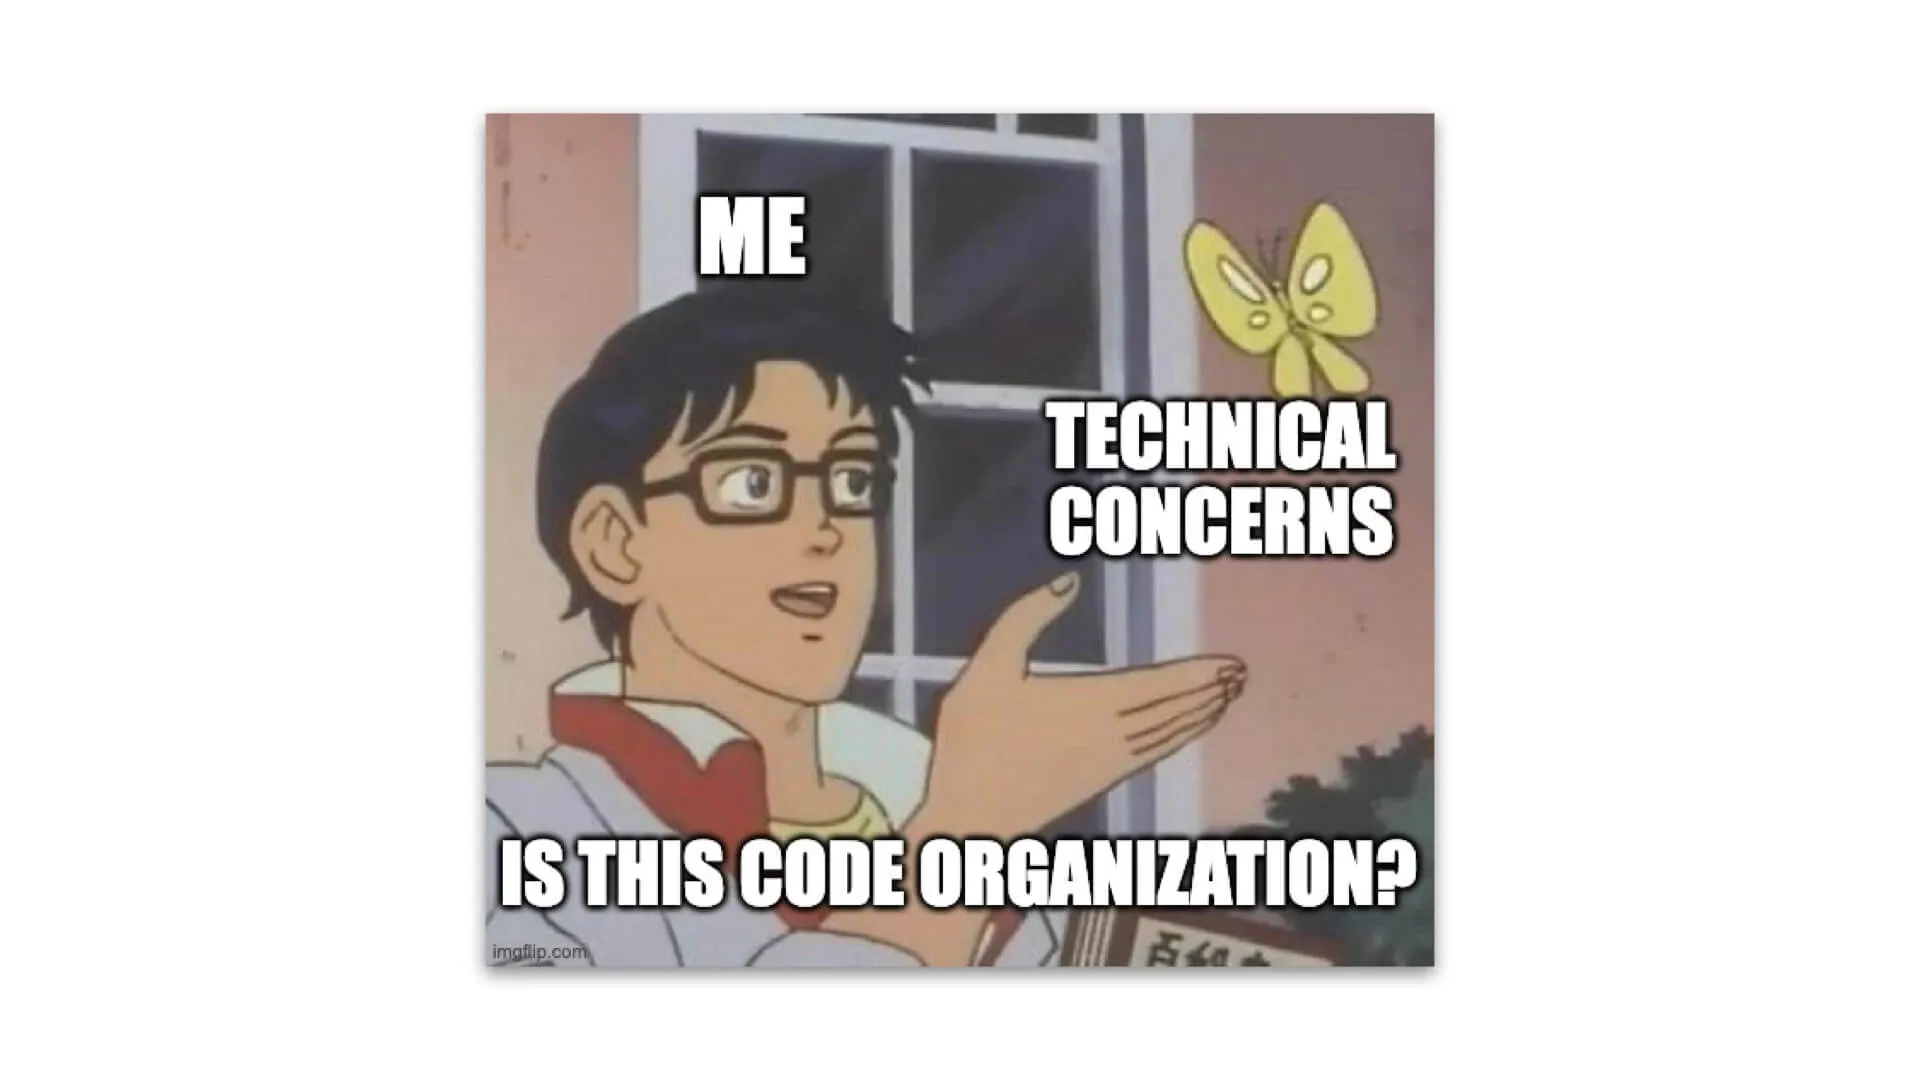 A meme of "is this a butterfly" where the person asking the question is me, the butterfly is "technical concerns" and the question is, "is this code organization?"